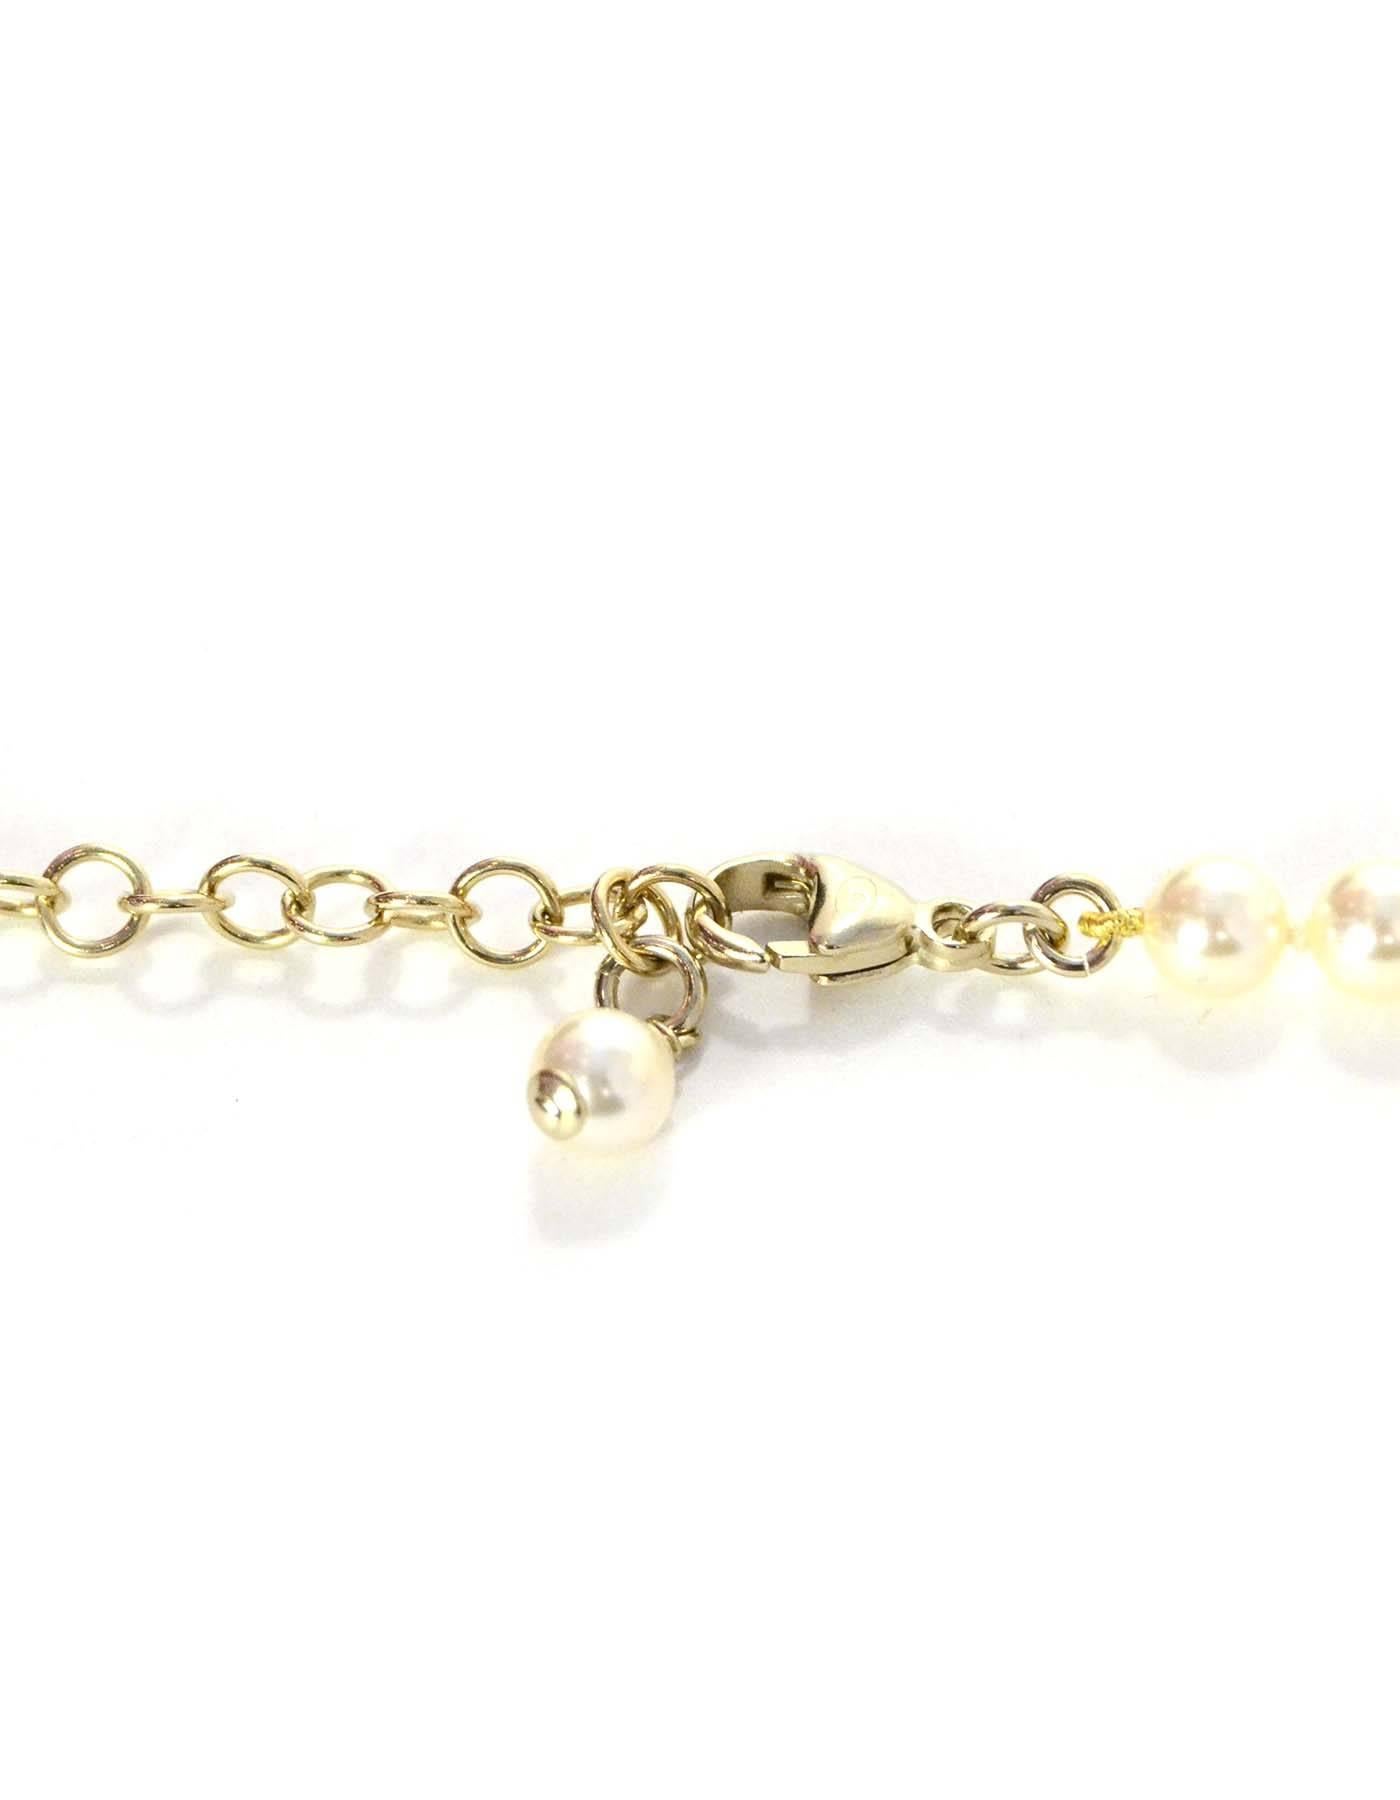 Features graduated ivory faux pearls with crystal circle beads and CCs. Can be worn as a single strand or doubled

    Made In: France
    Year of Production: 2015
    Color: Ivory faux pearls with light green and champagne crystals
   